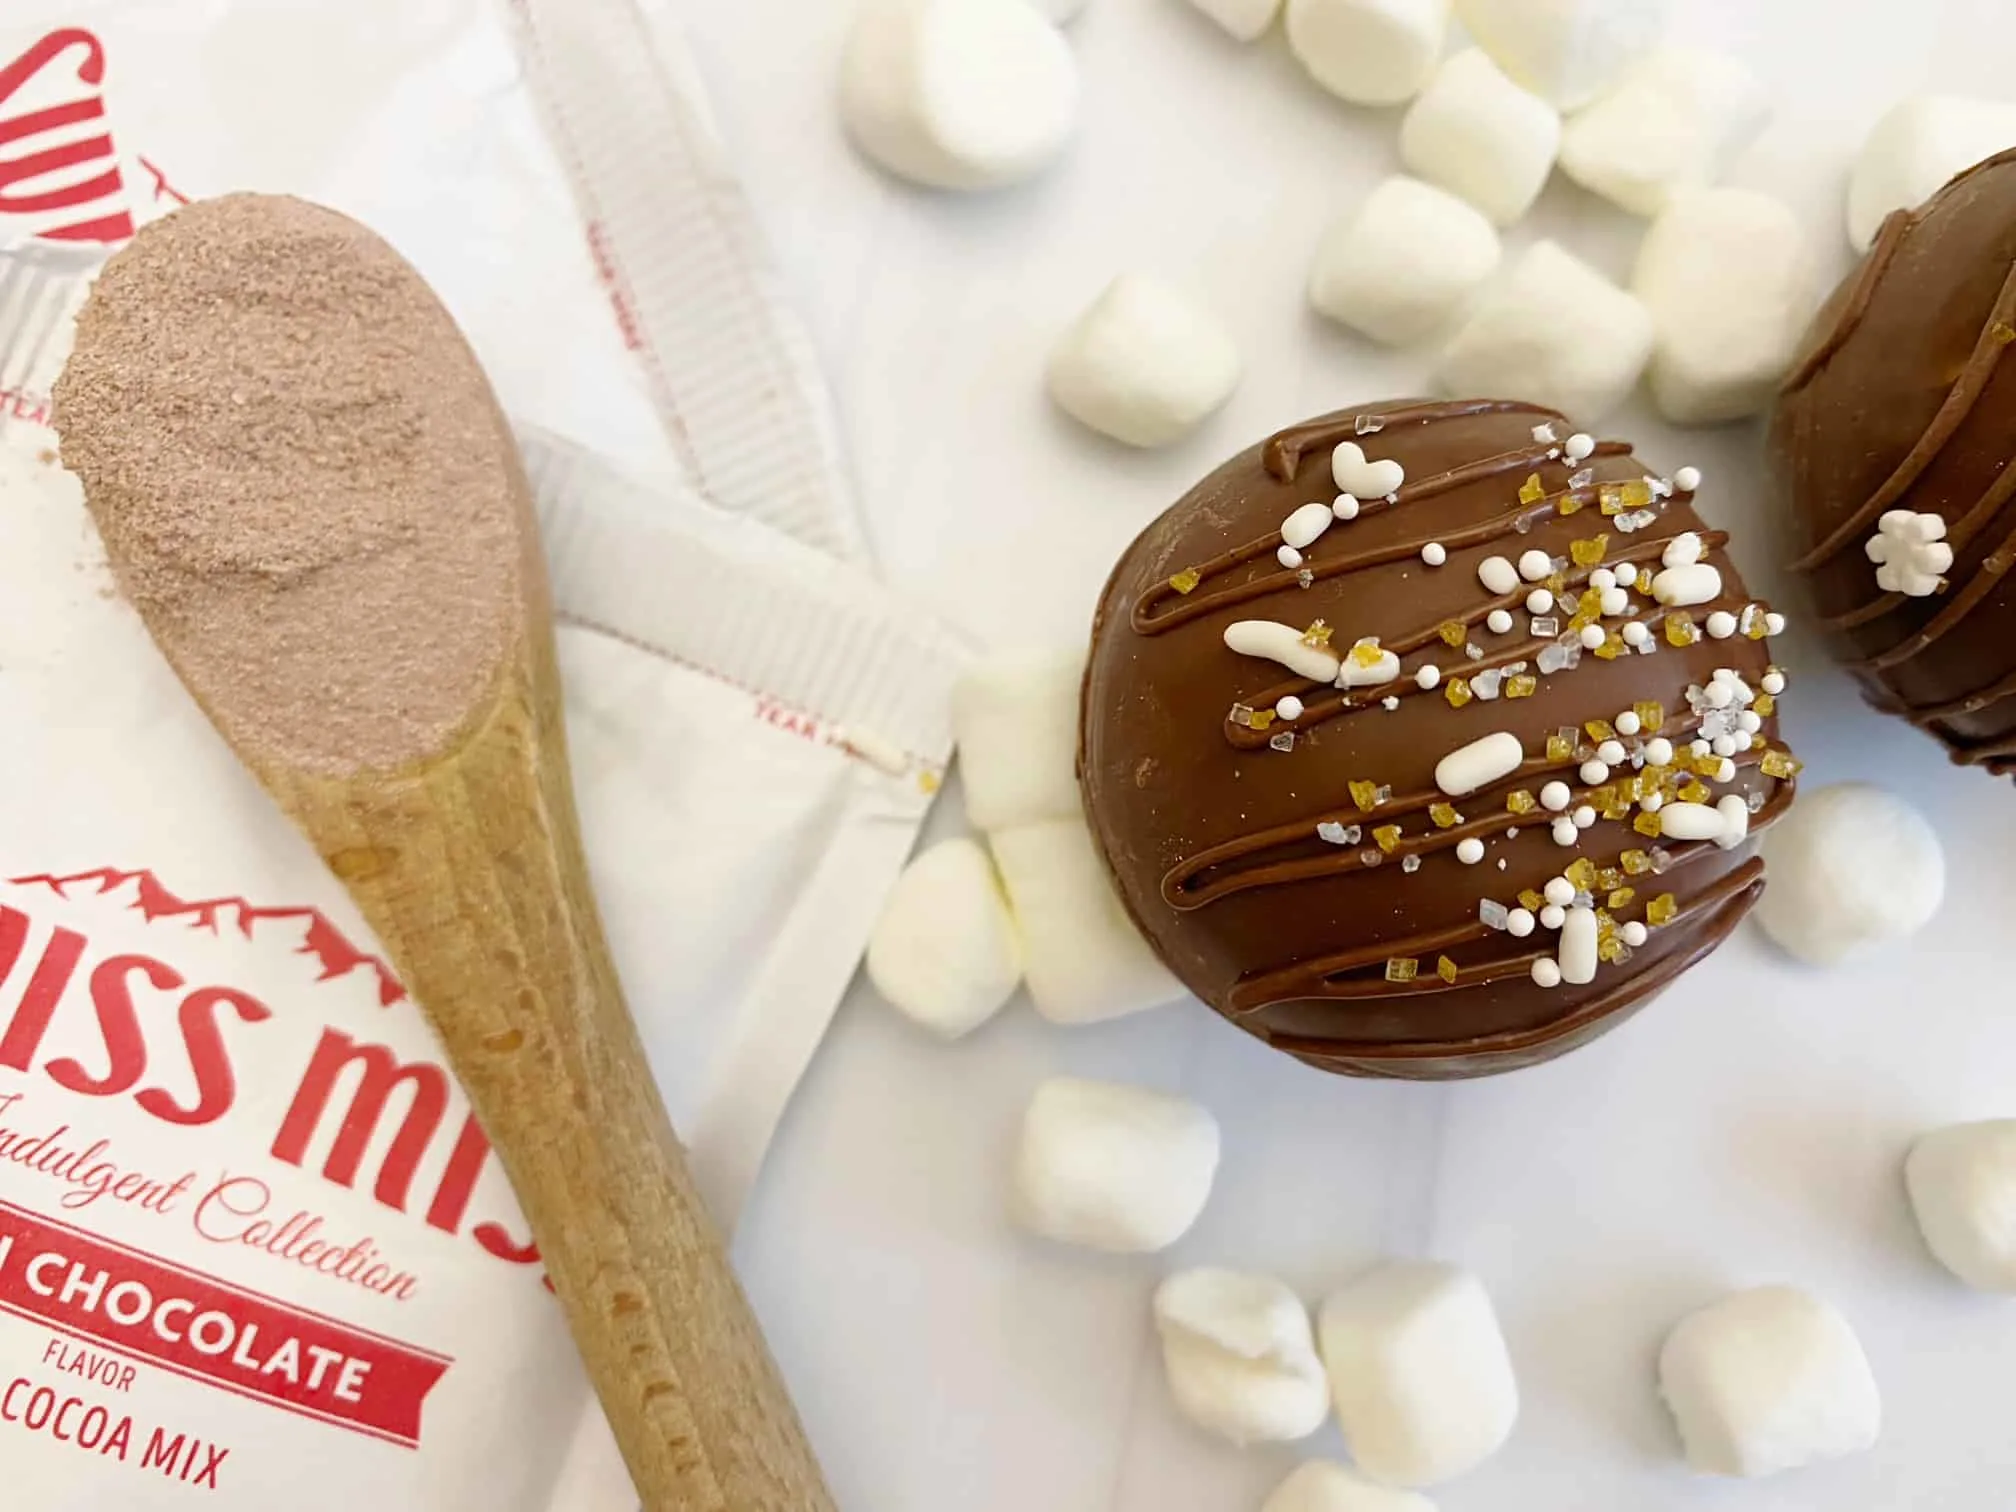 package swiss miss, wooden spoon, marshmallow, hot cocoa bomb